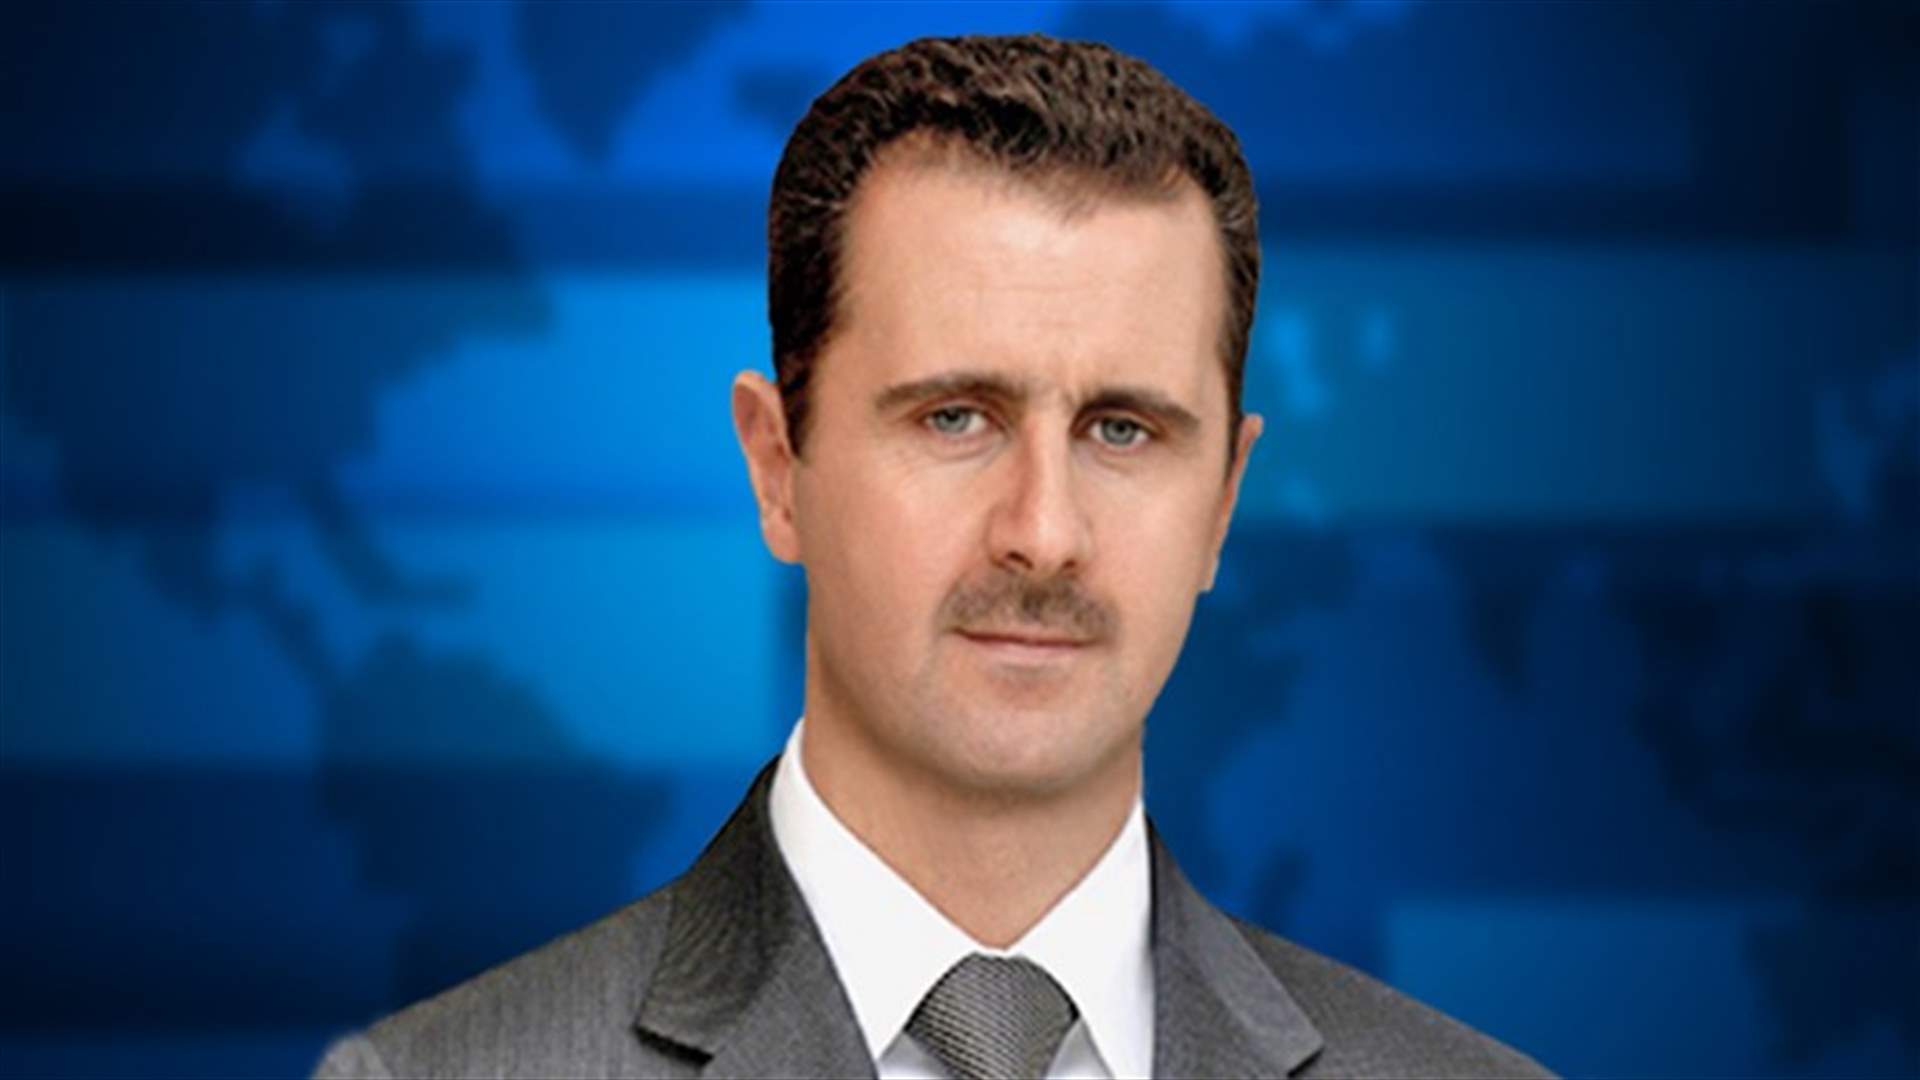 Syria&#39;s Assad says he won&#39;t negotiate with &quot;terrorists&quot; as US wants